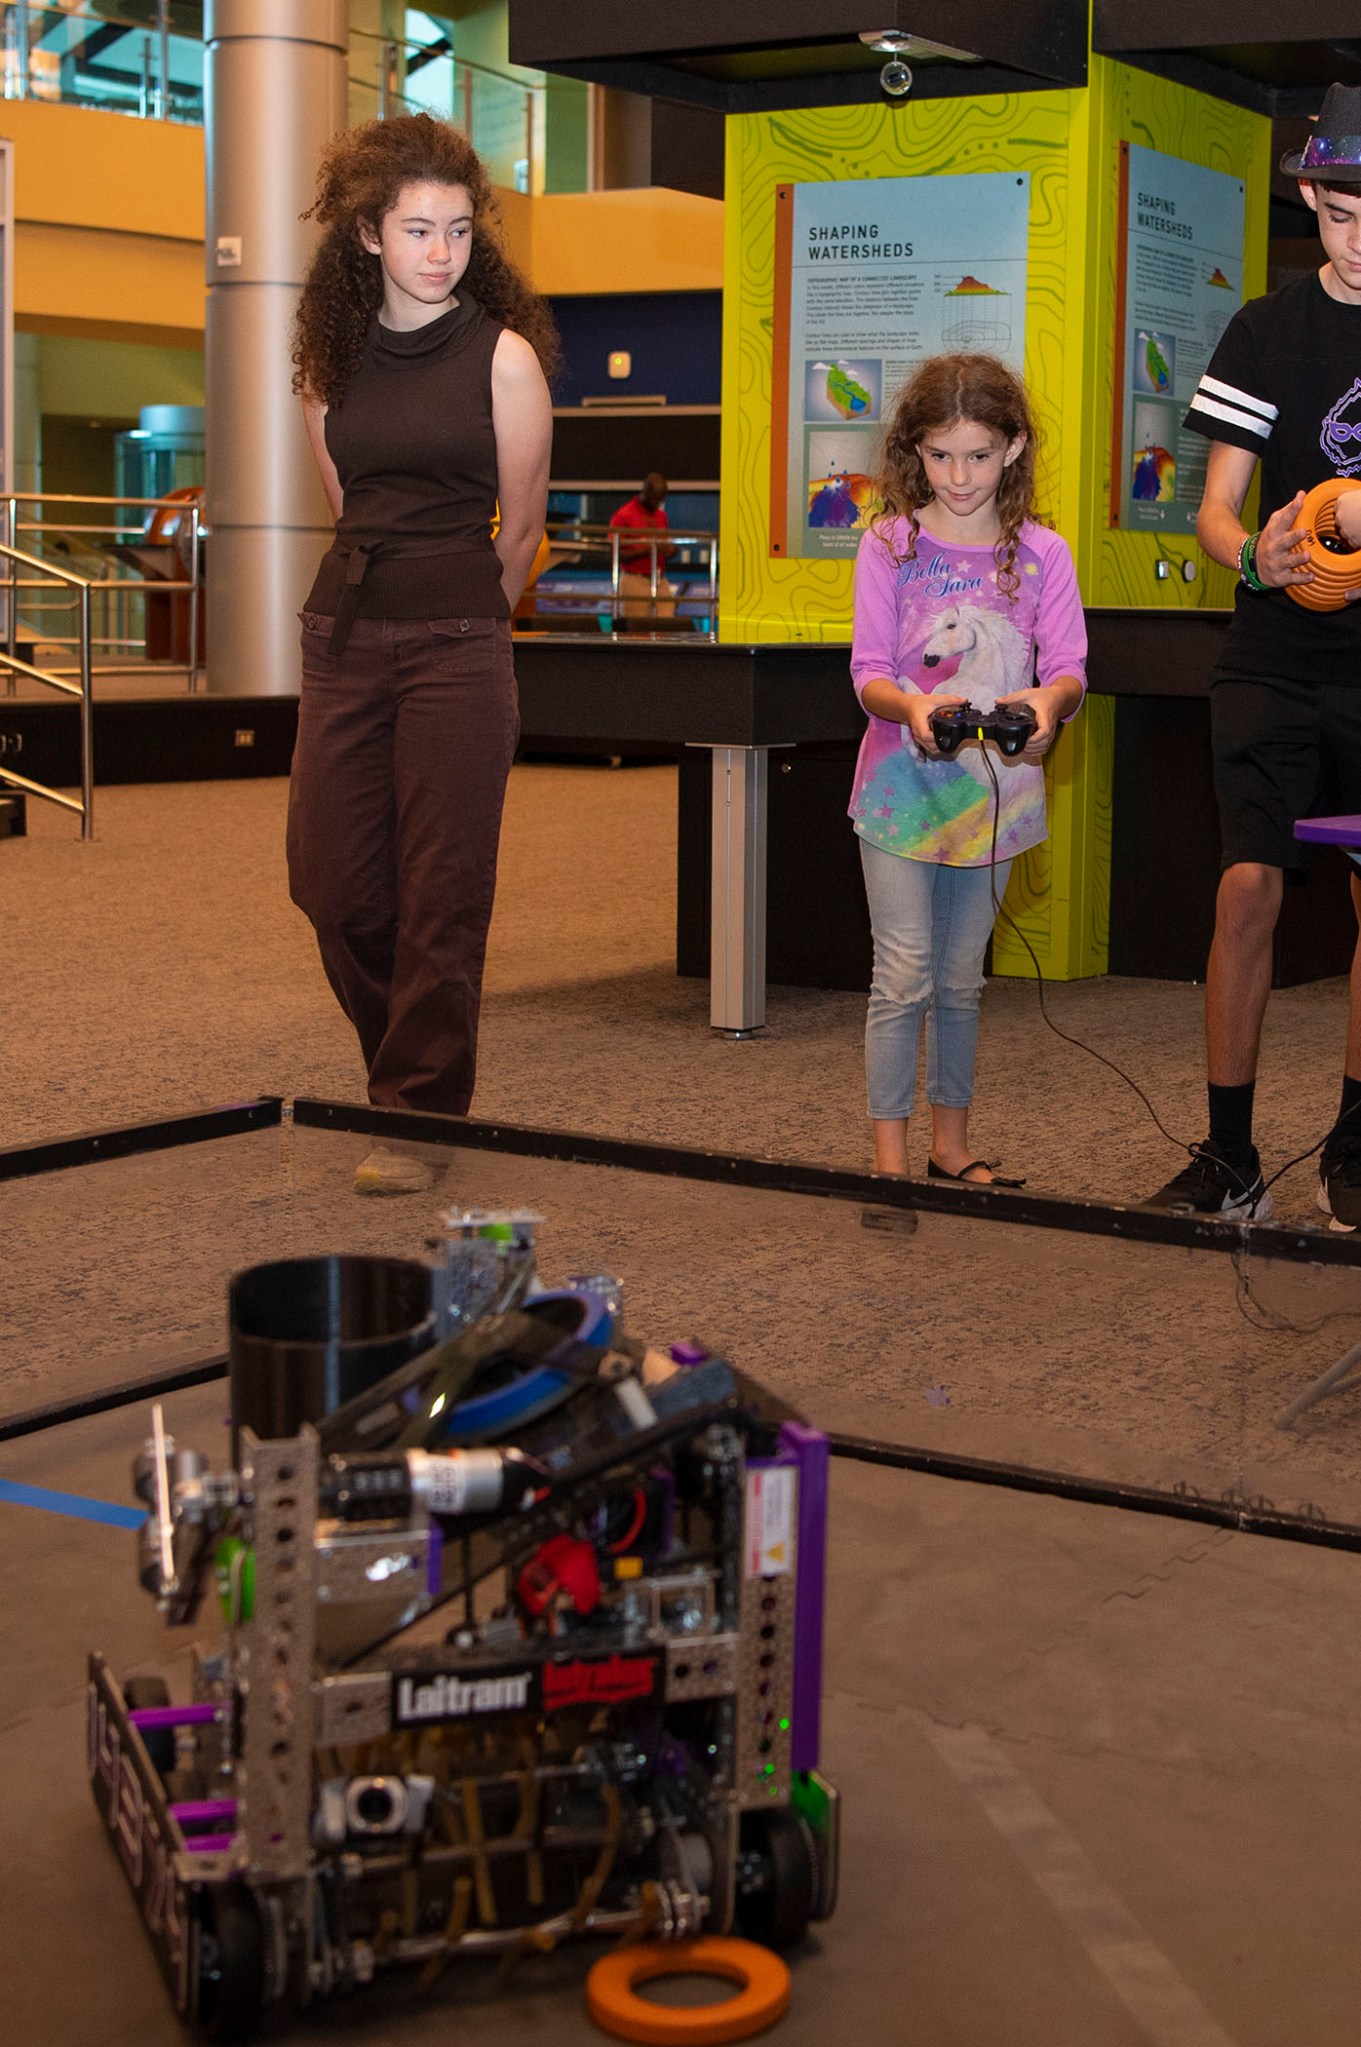 A young girl operates a robot, provided by Team 2992